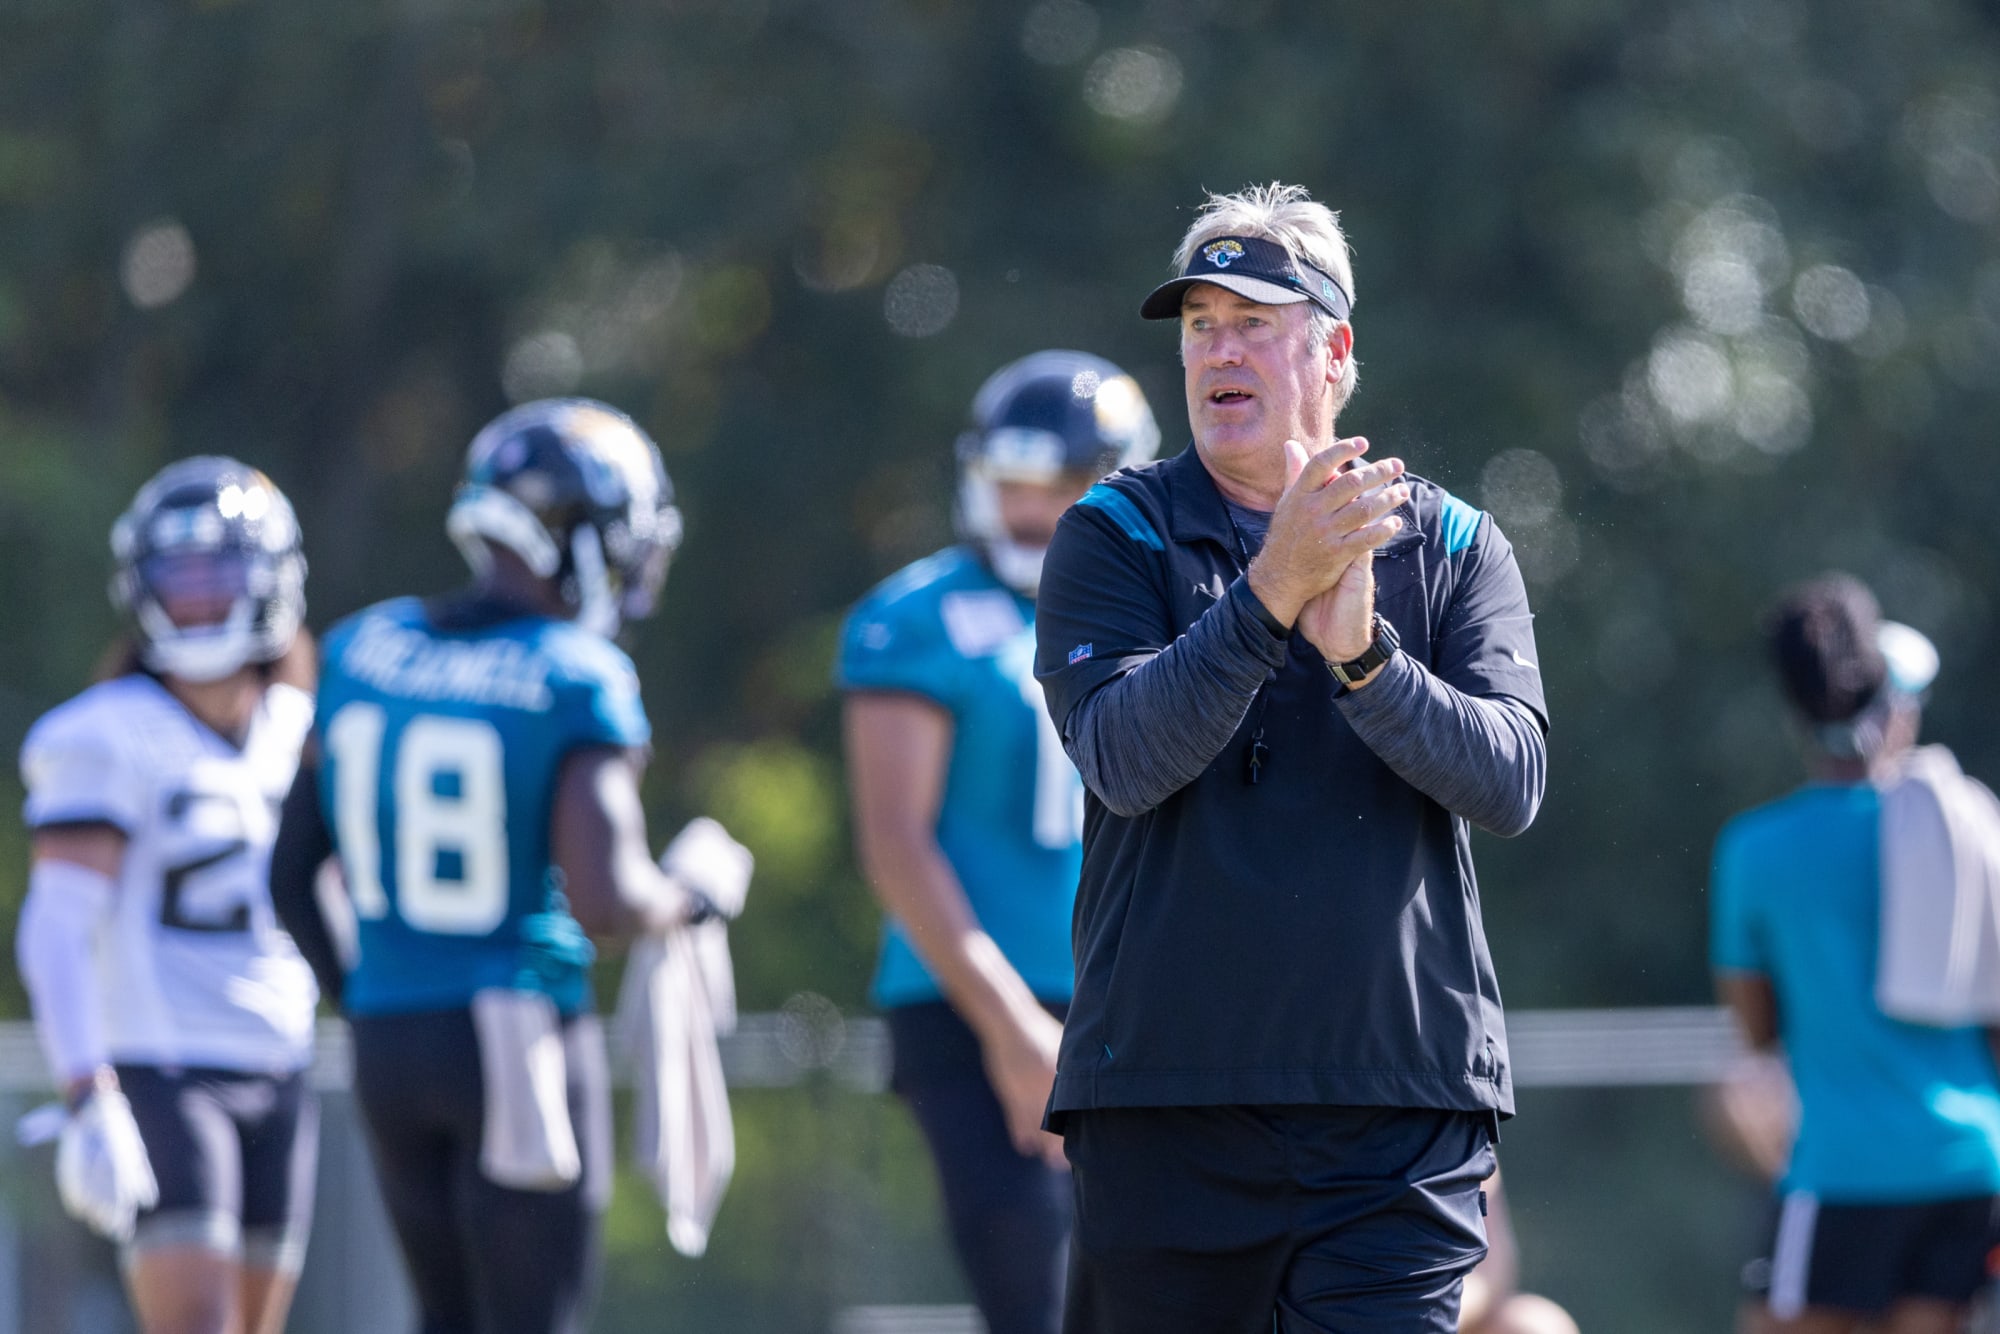 Media personality thinks Doug Pederson can lead Jaguars to big turnaround in 2022